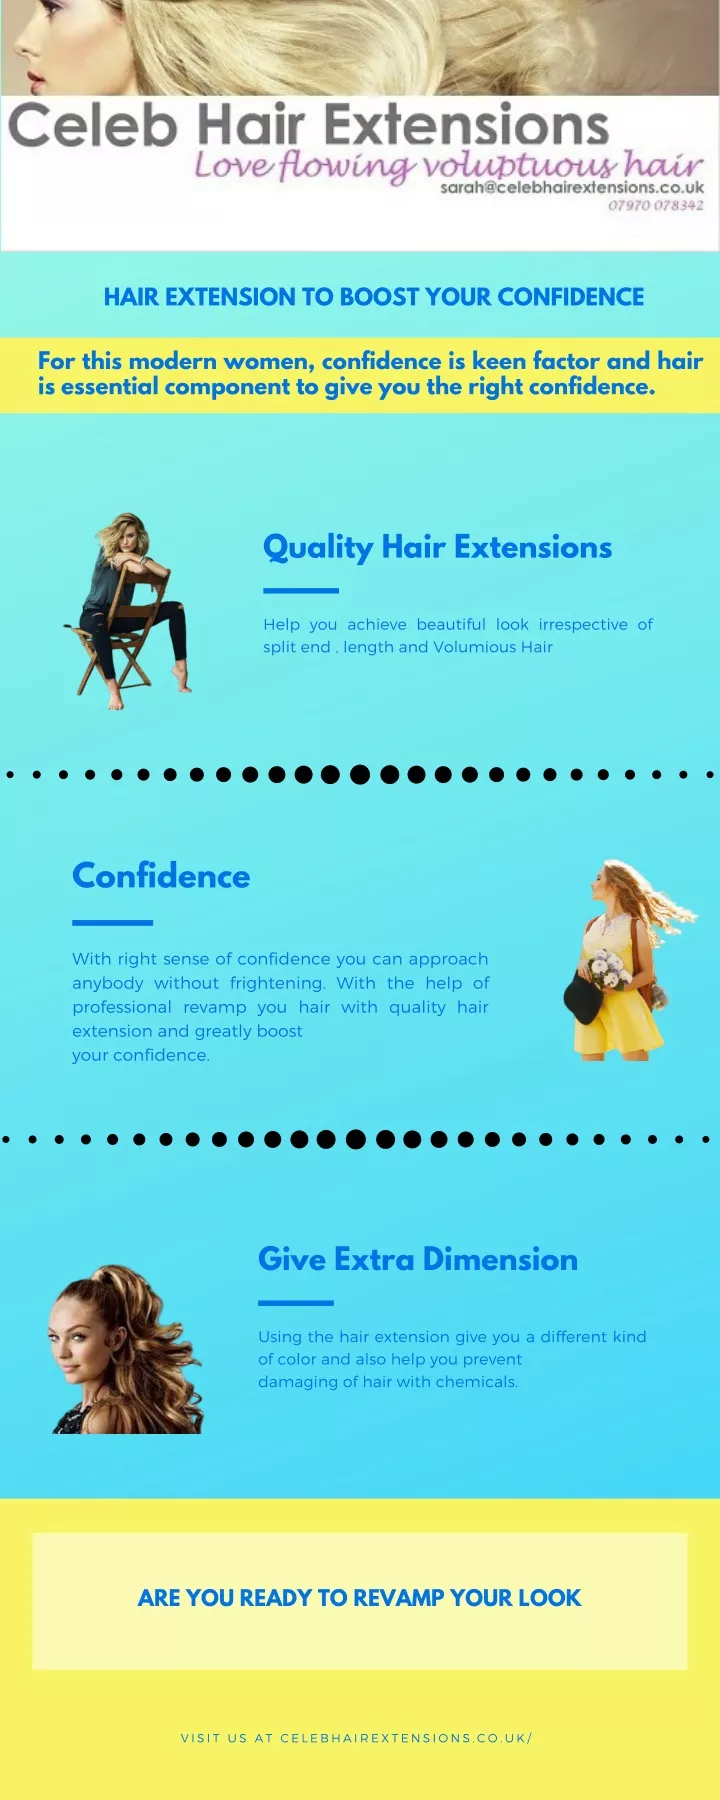 hair extension to boost your confidence